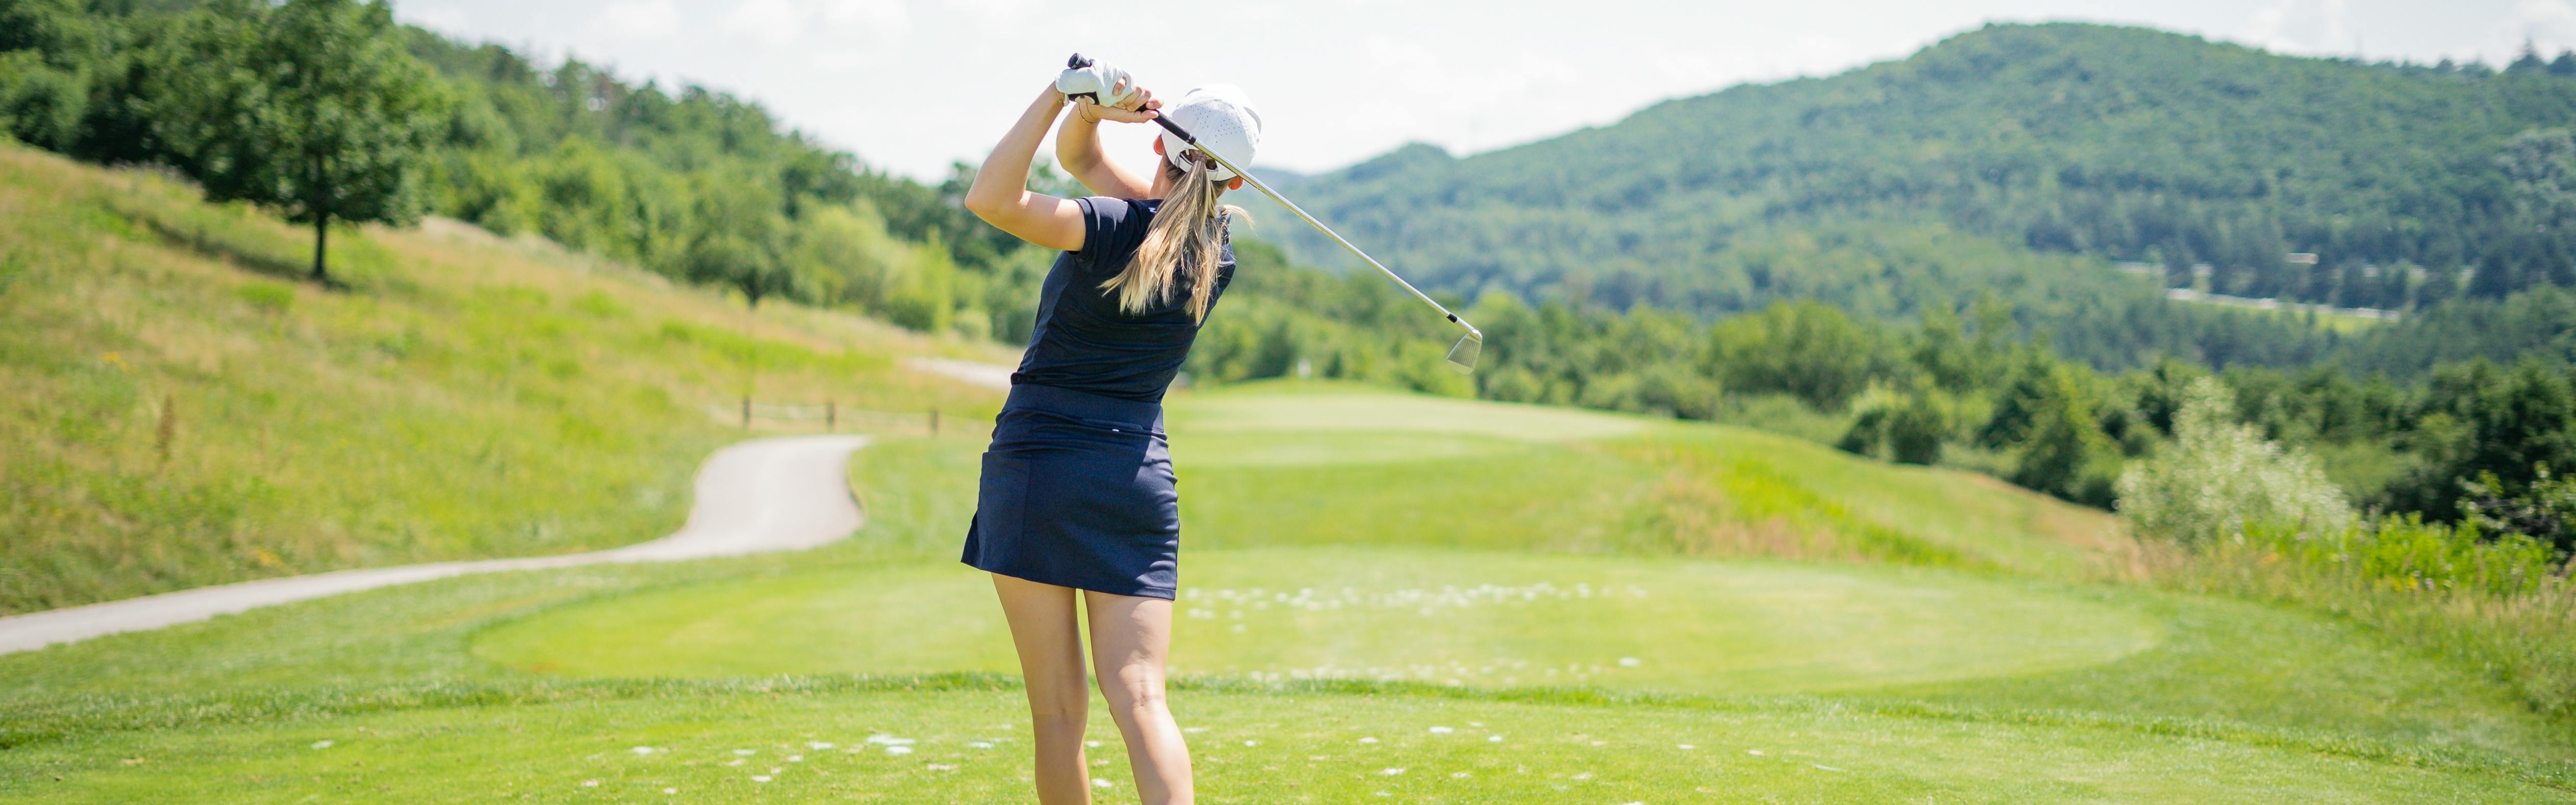 FORE ALL LAUNCHES REVOLUTIONARY WOMEN'S GOLF APPAREL & PRODUCT